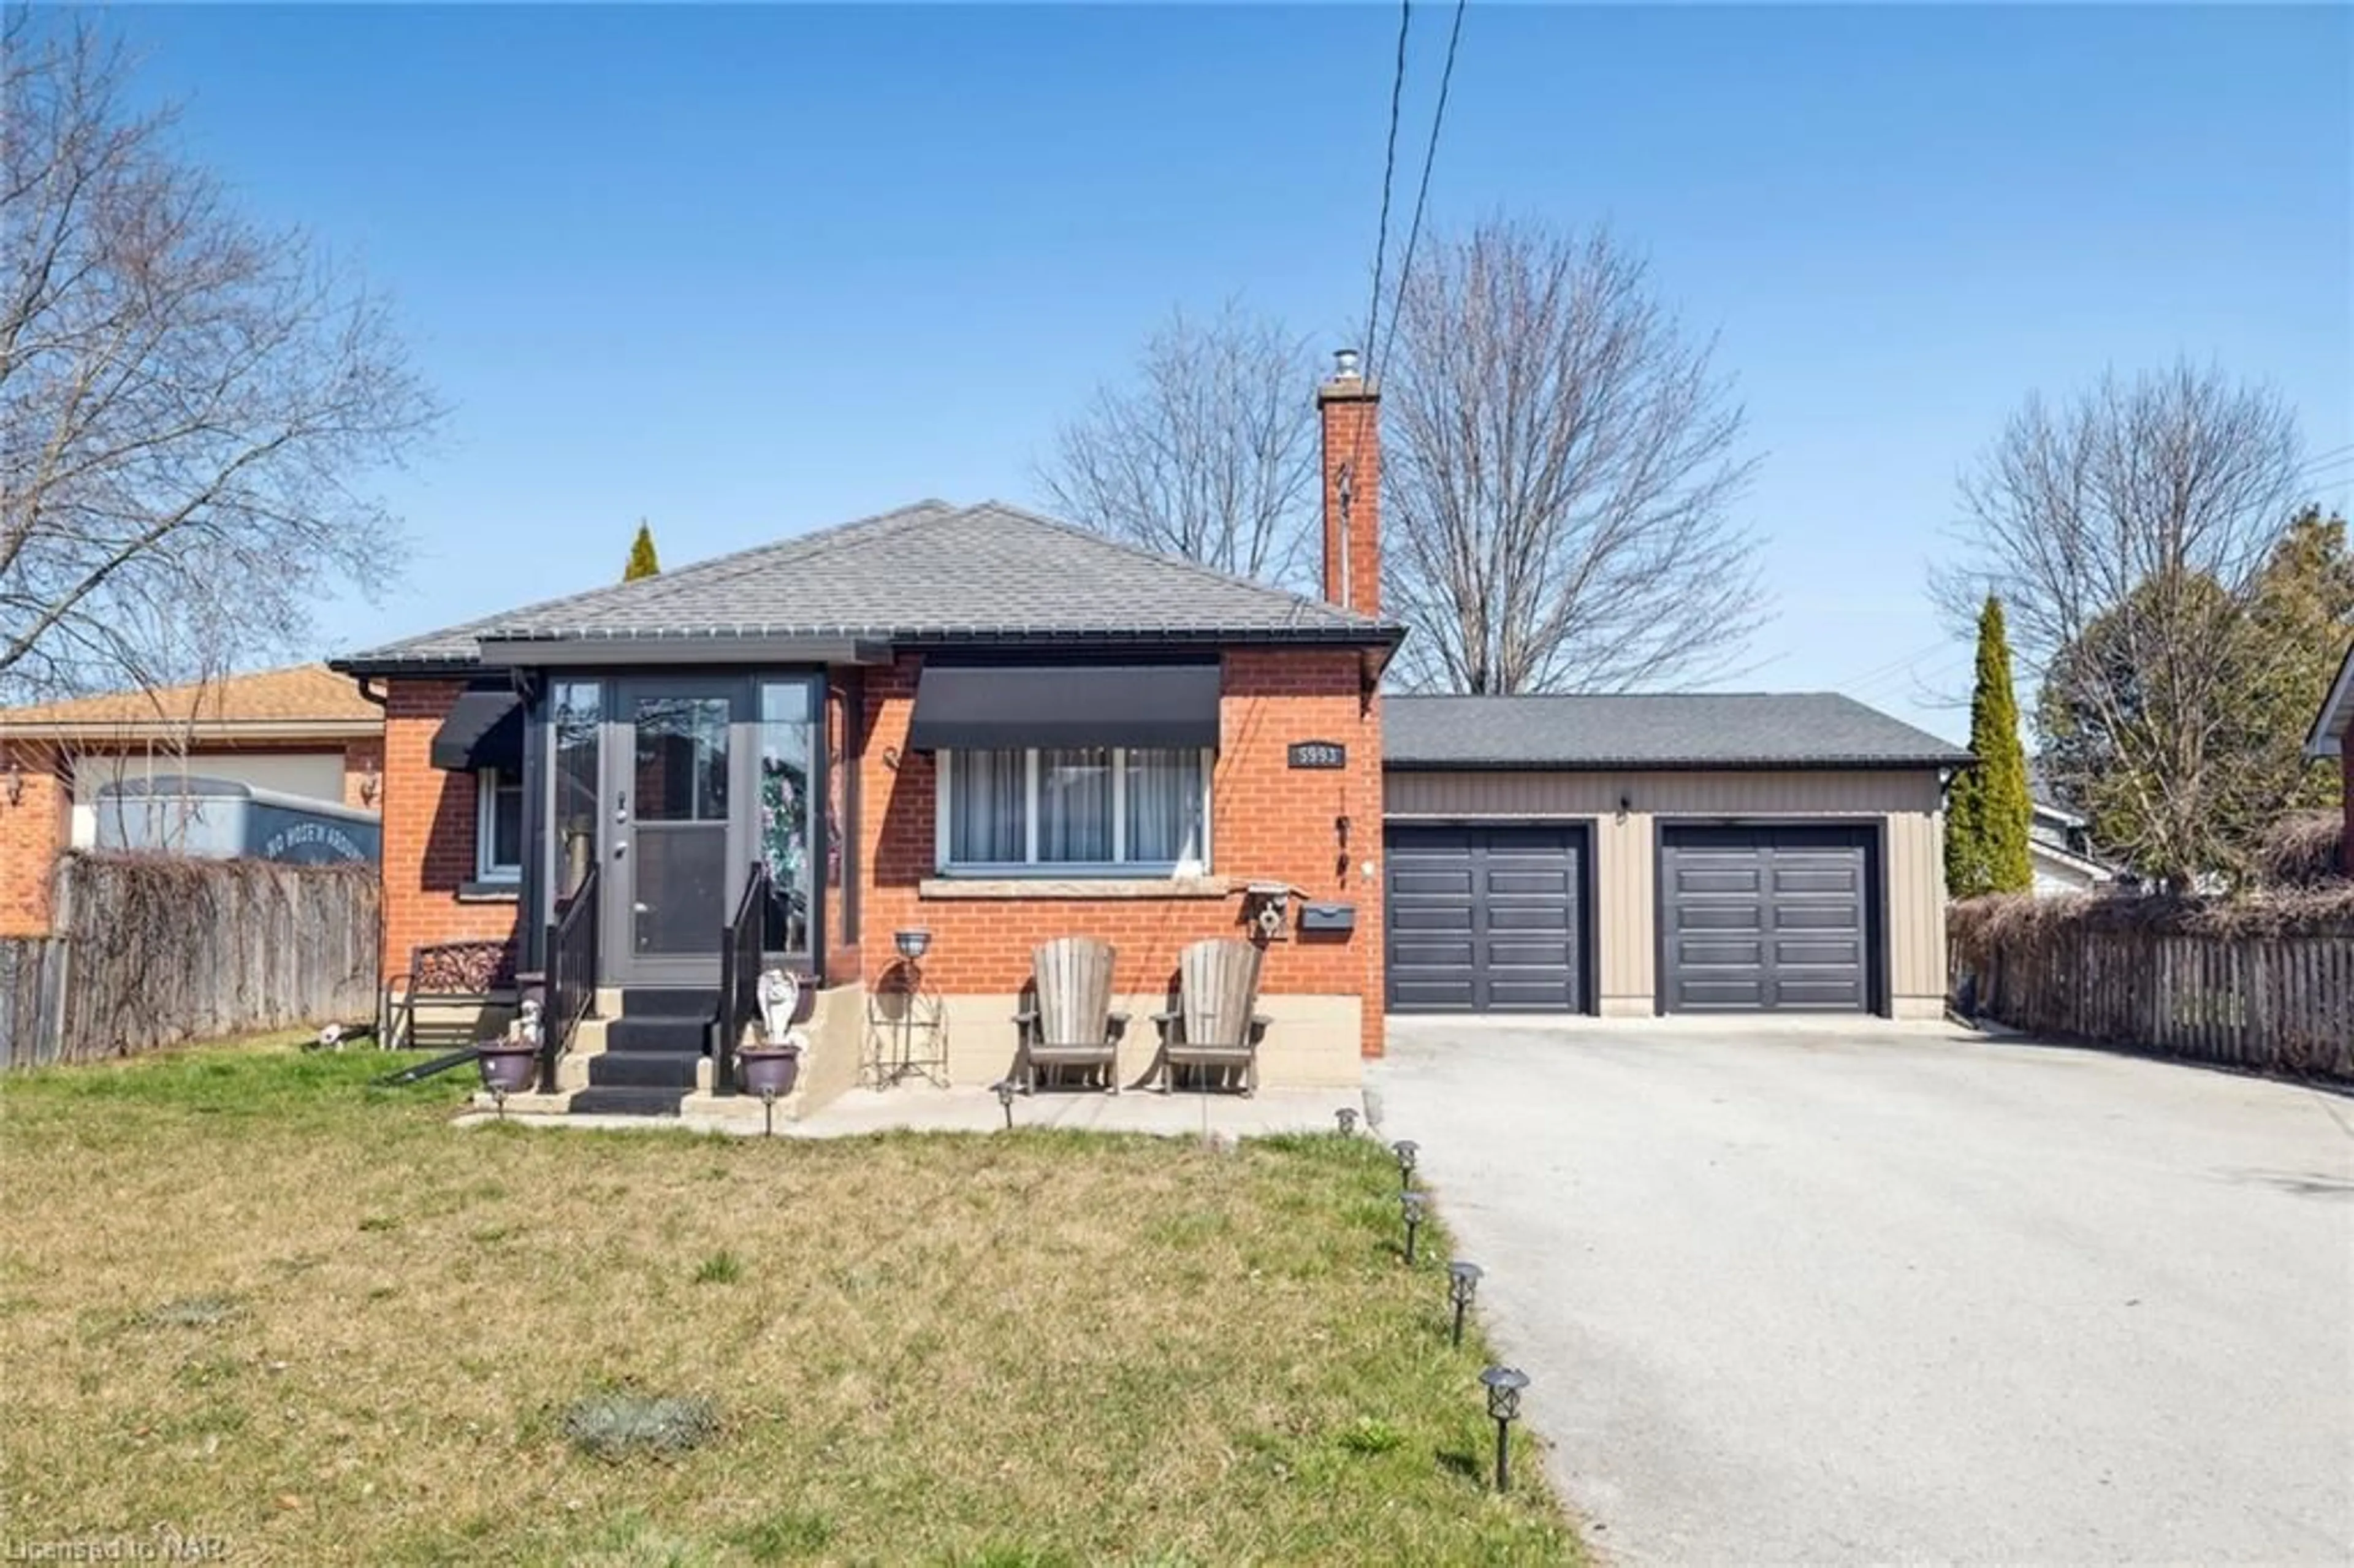 Frontside or backside of a home for 5993 Coholan St, Niagara Falls Ontario L2J 1K7